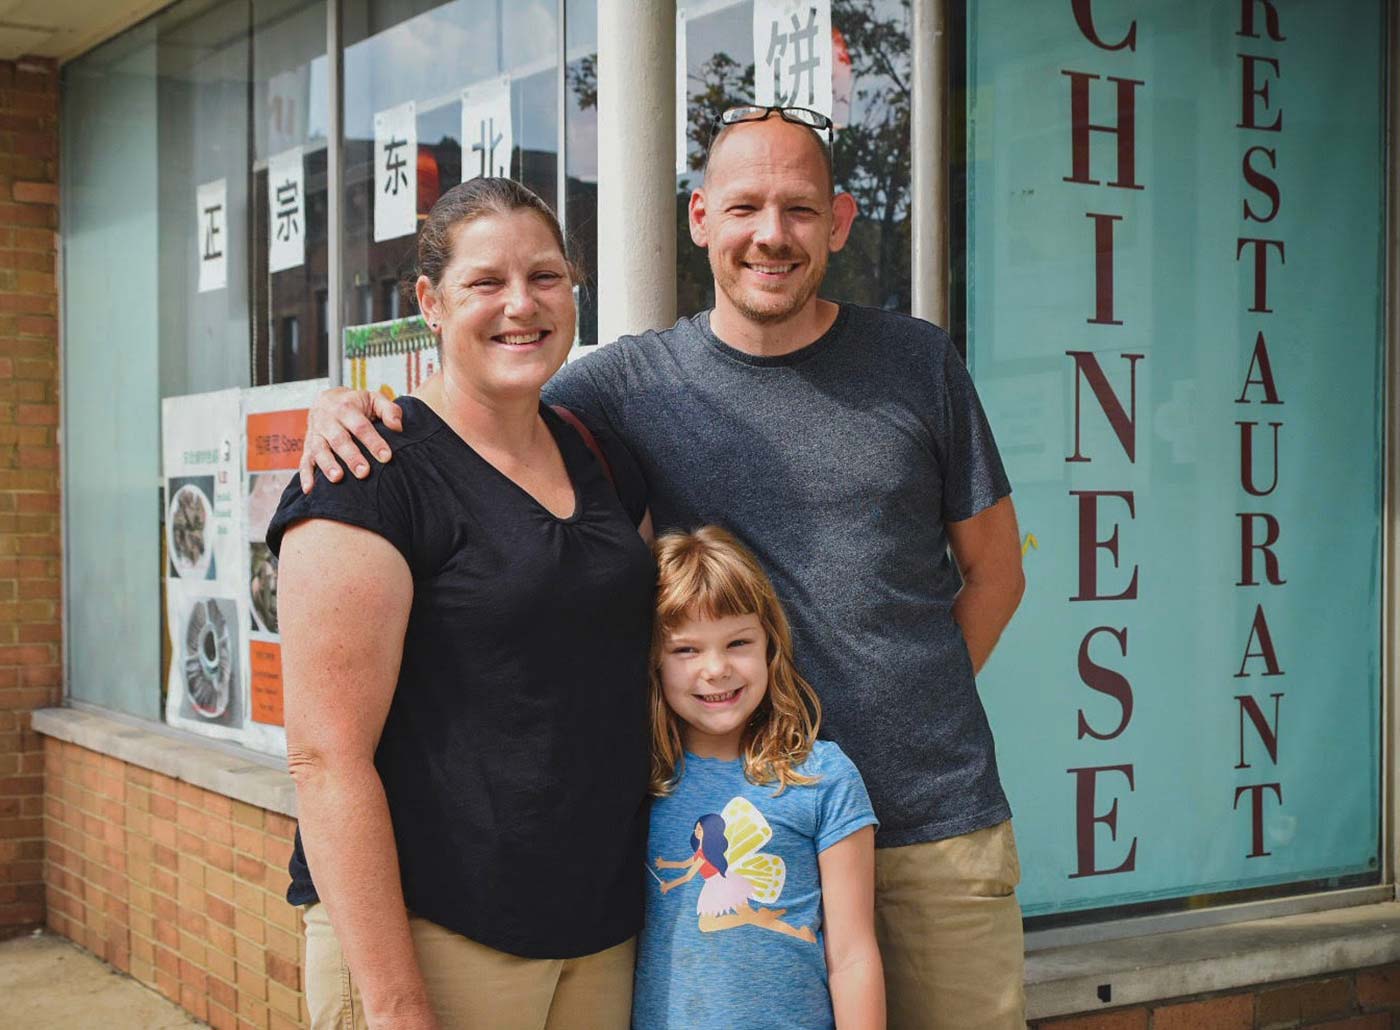 Bethia Woolf, Andy Dehus and their daughter, Zoe, visit NE Chinese Restaurant on North High Street, which is among the restaurants included in Trust Fall dinners.